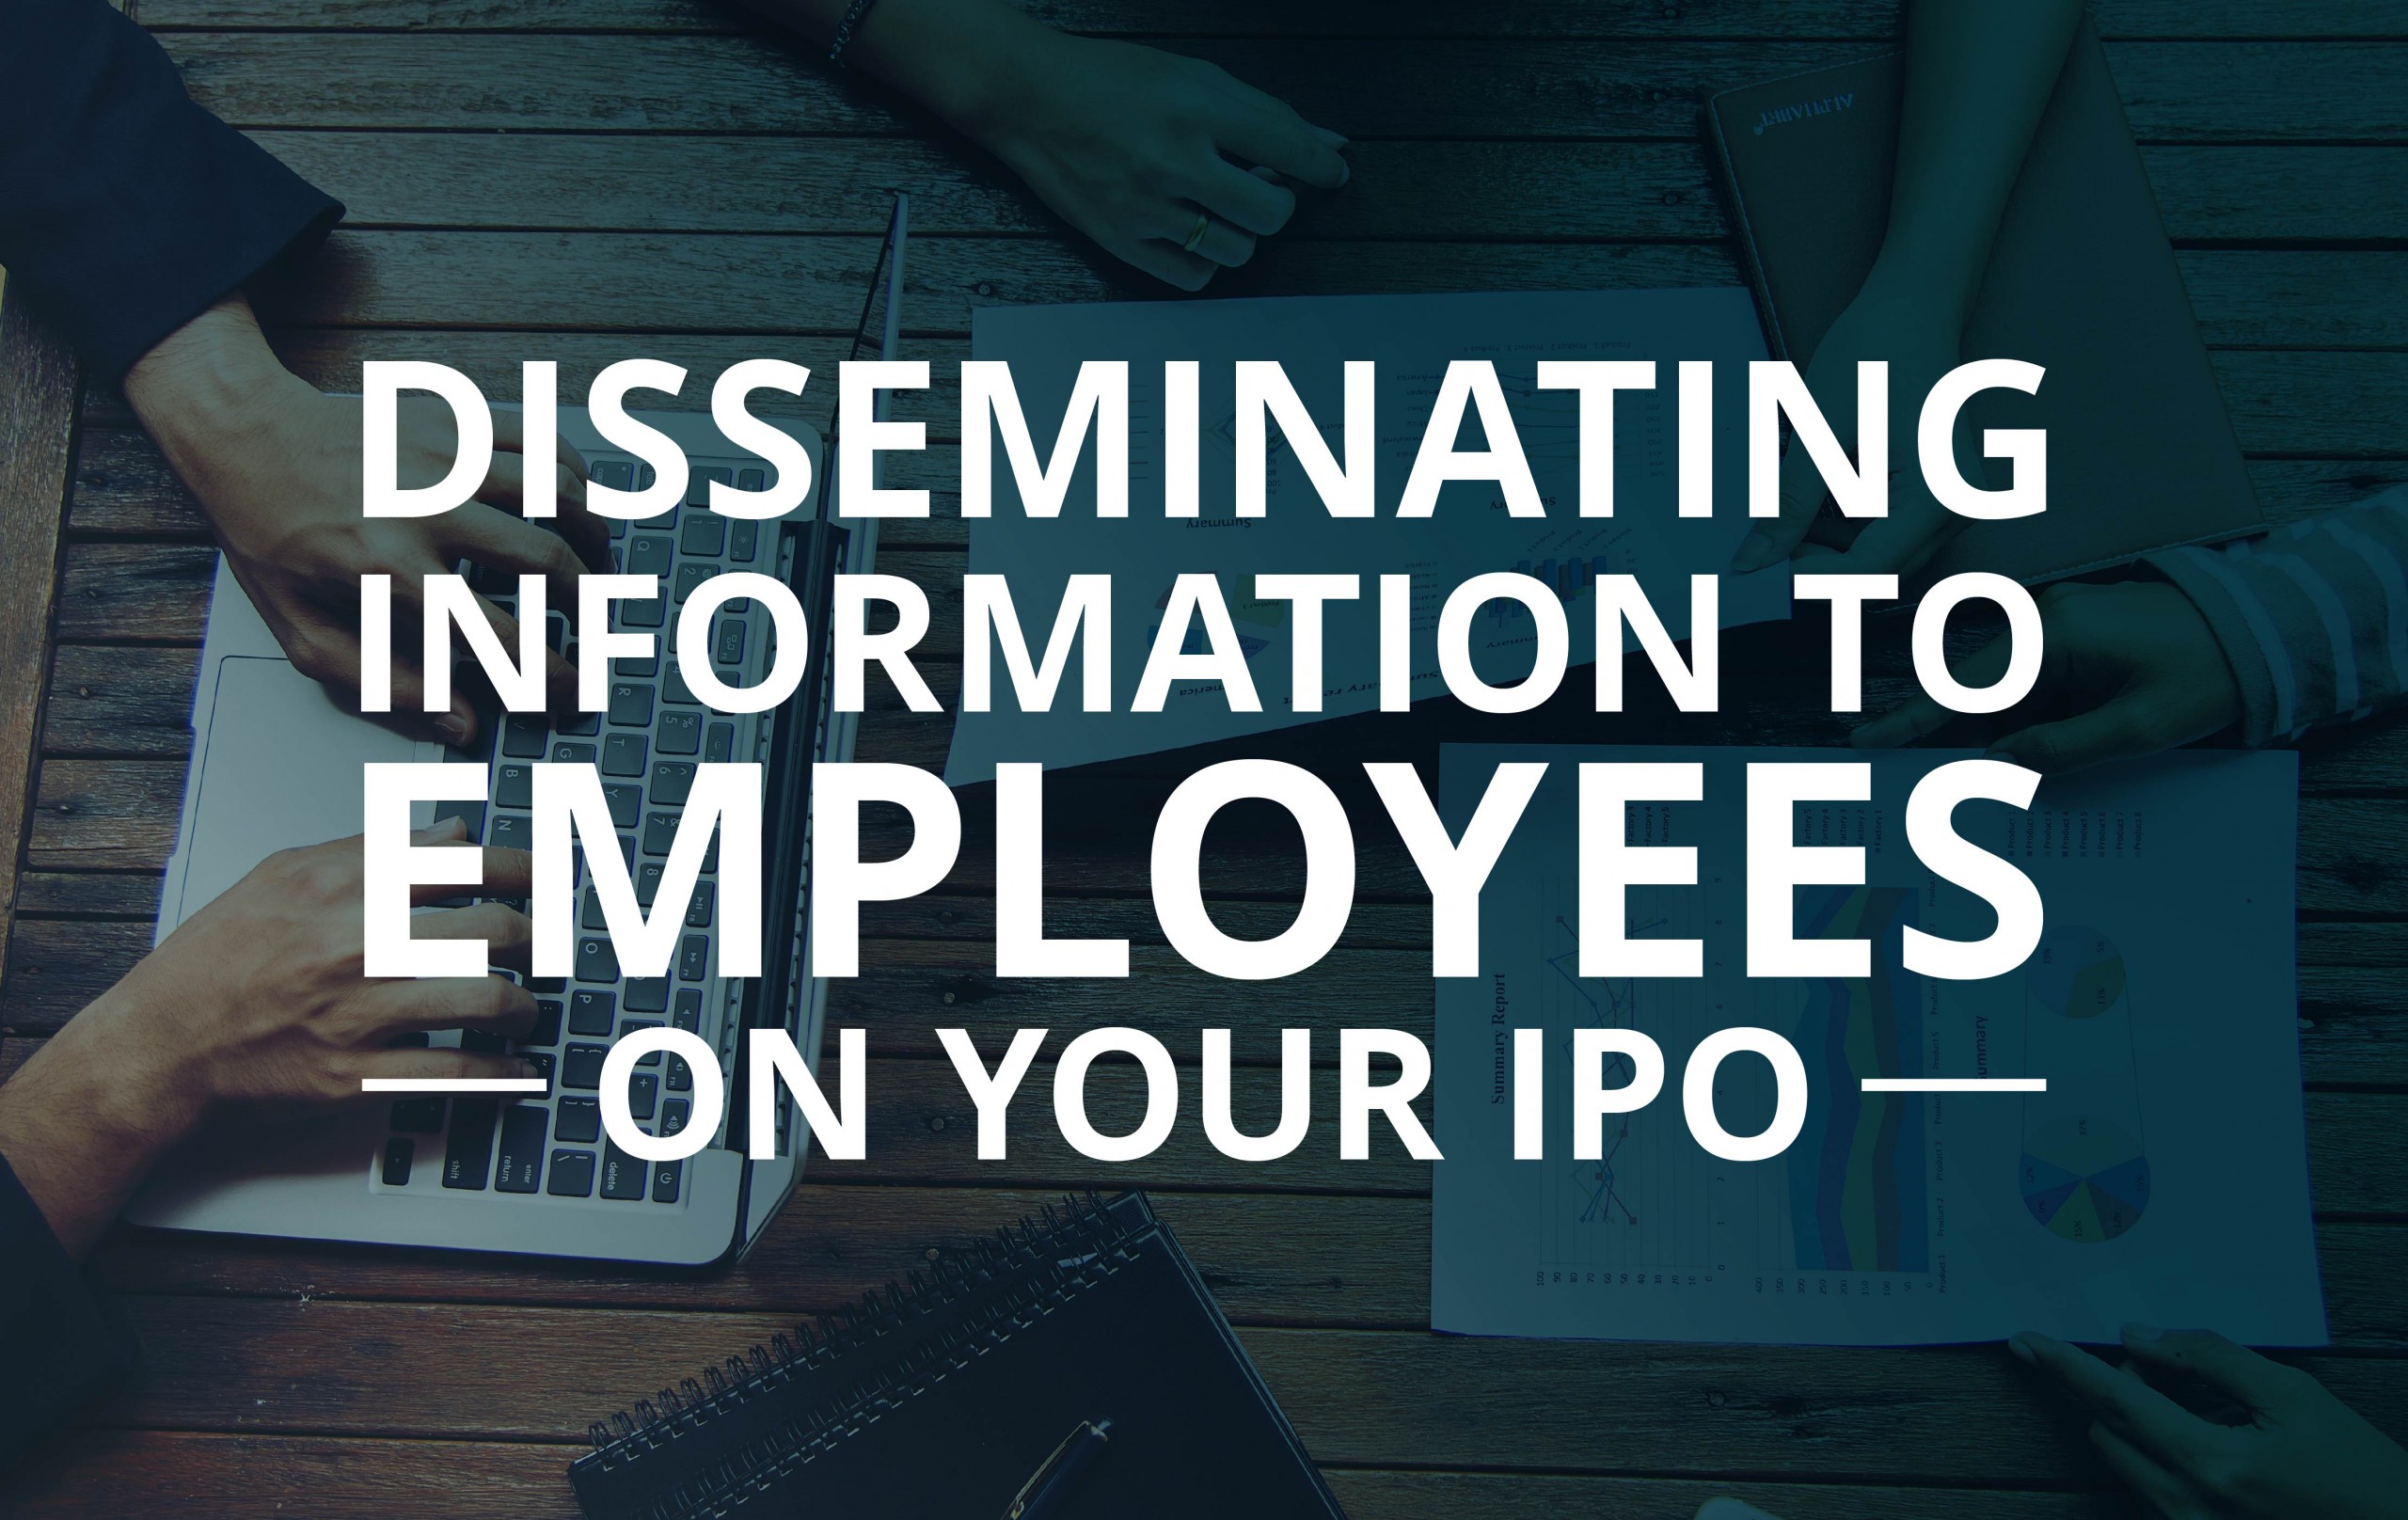 image for Disseminating Information to Employees on Your IPO